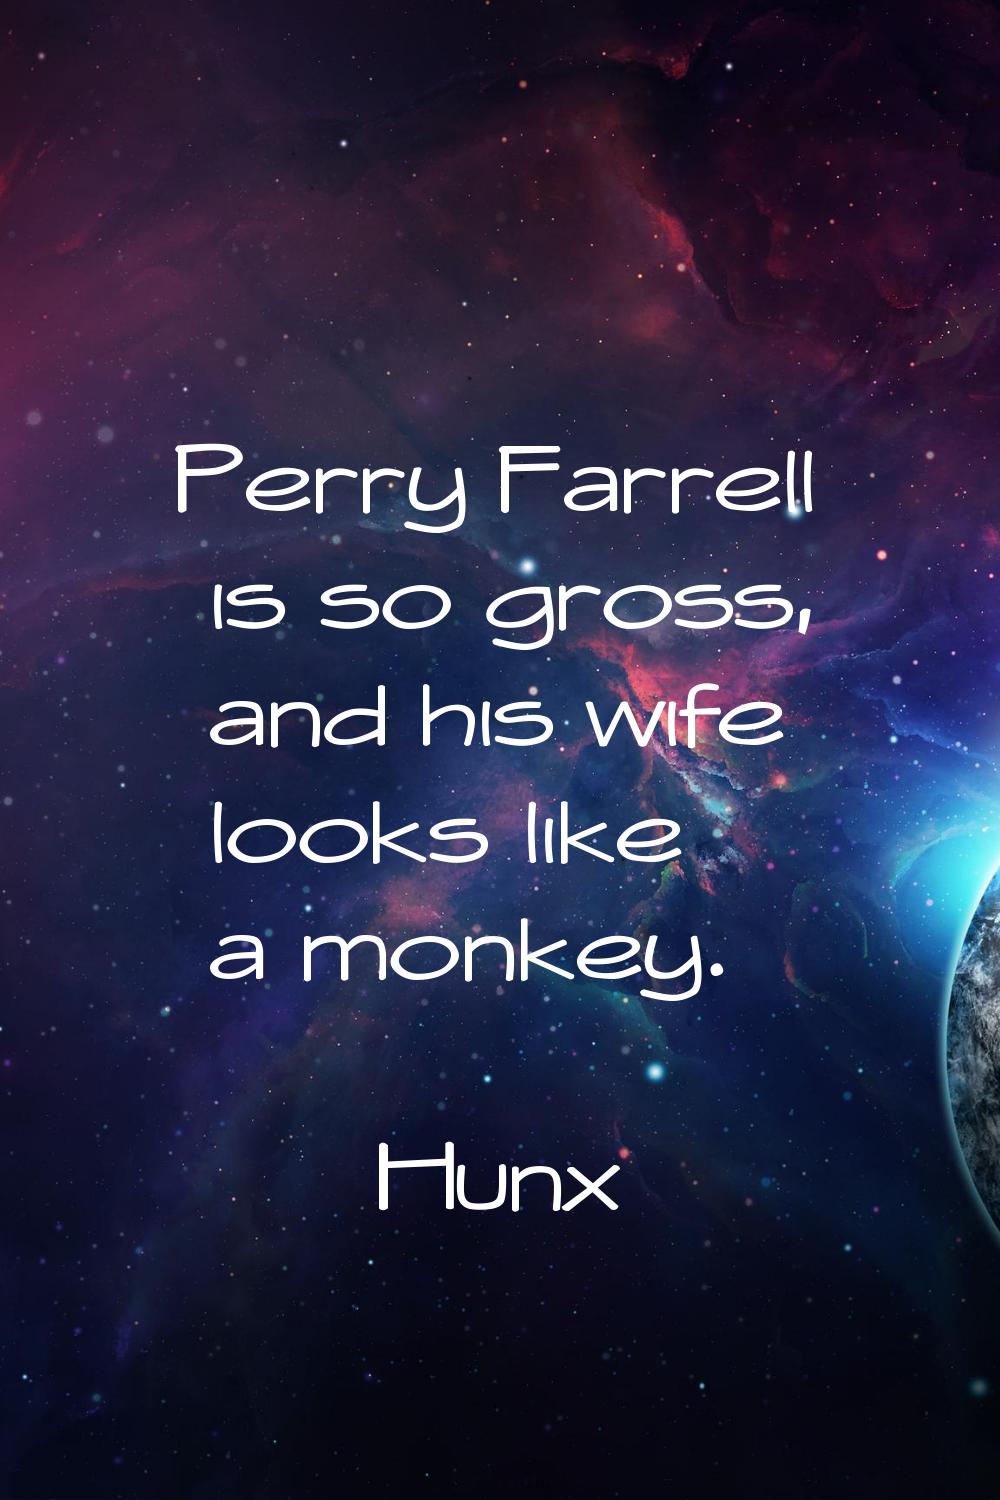 Perry Farrell is so gross, and his wife looks like a monkey.